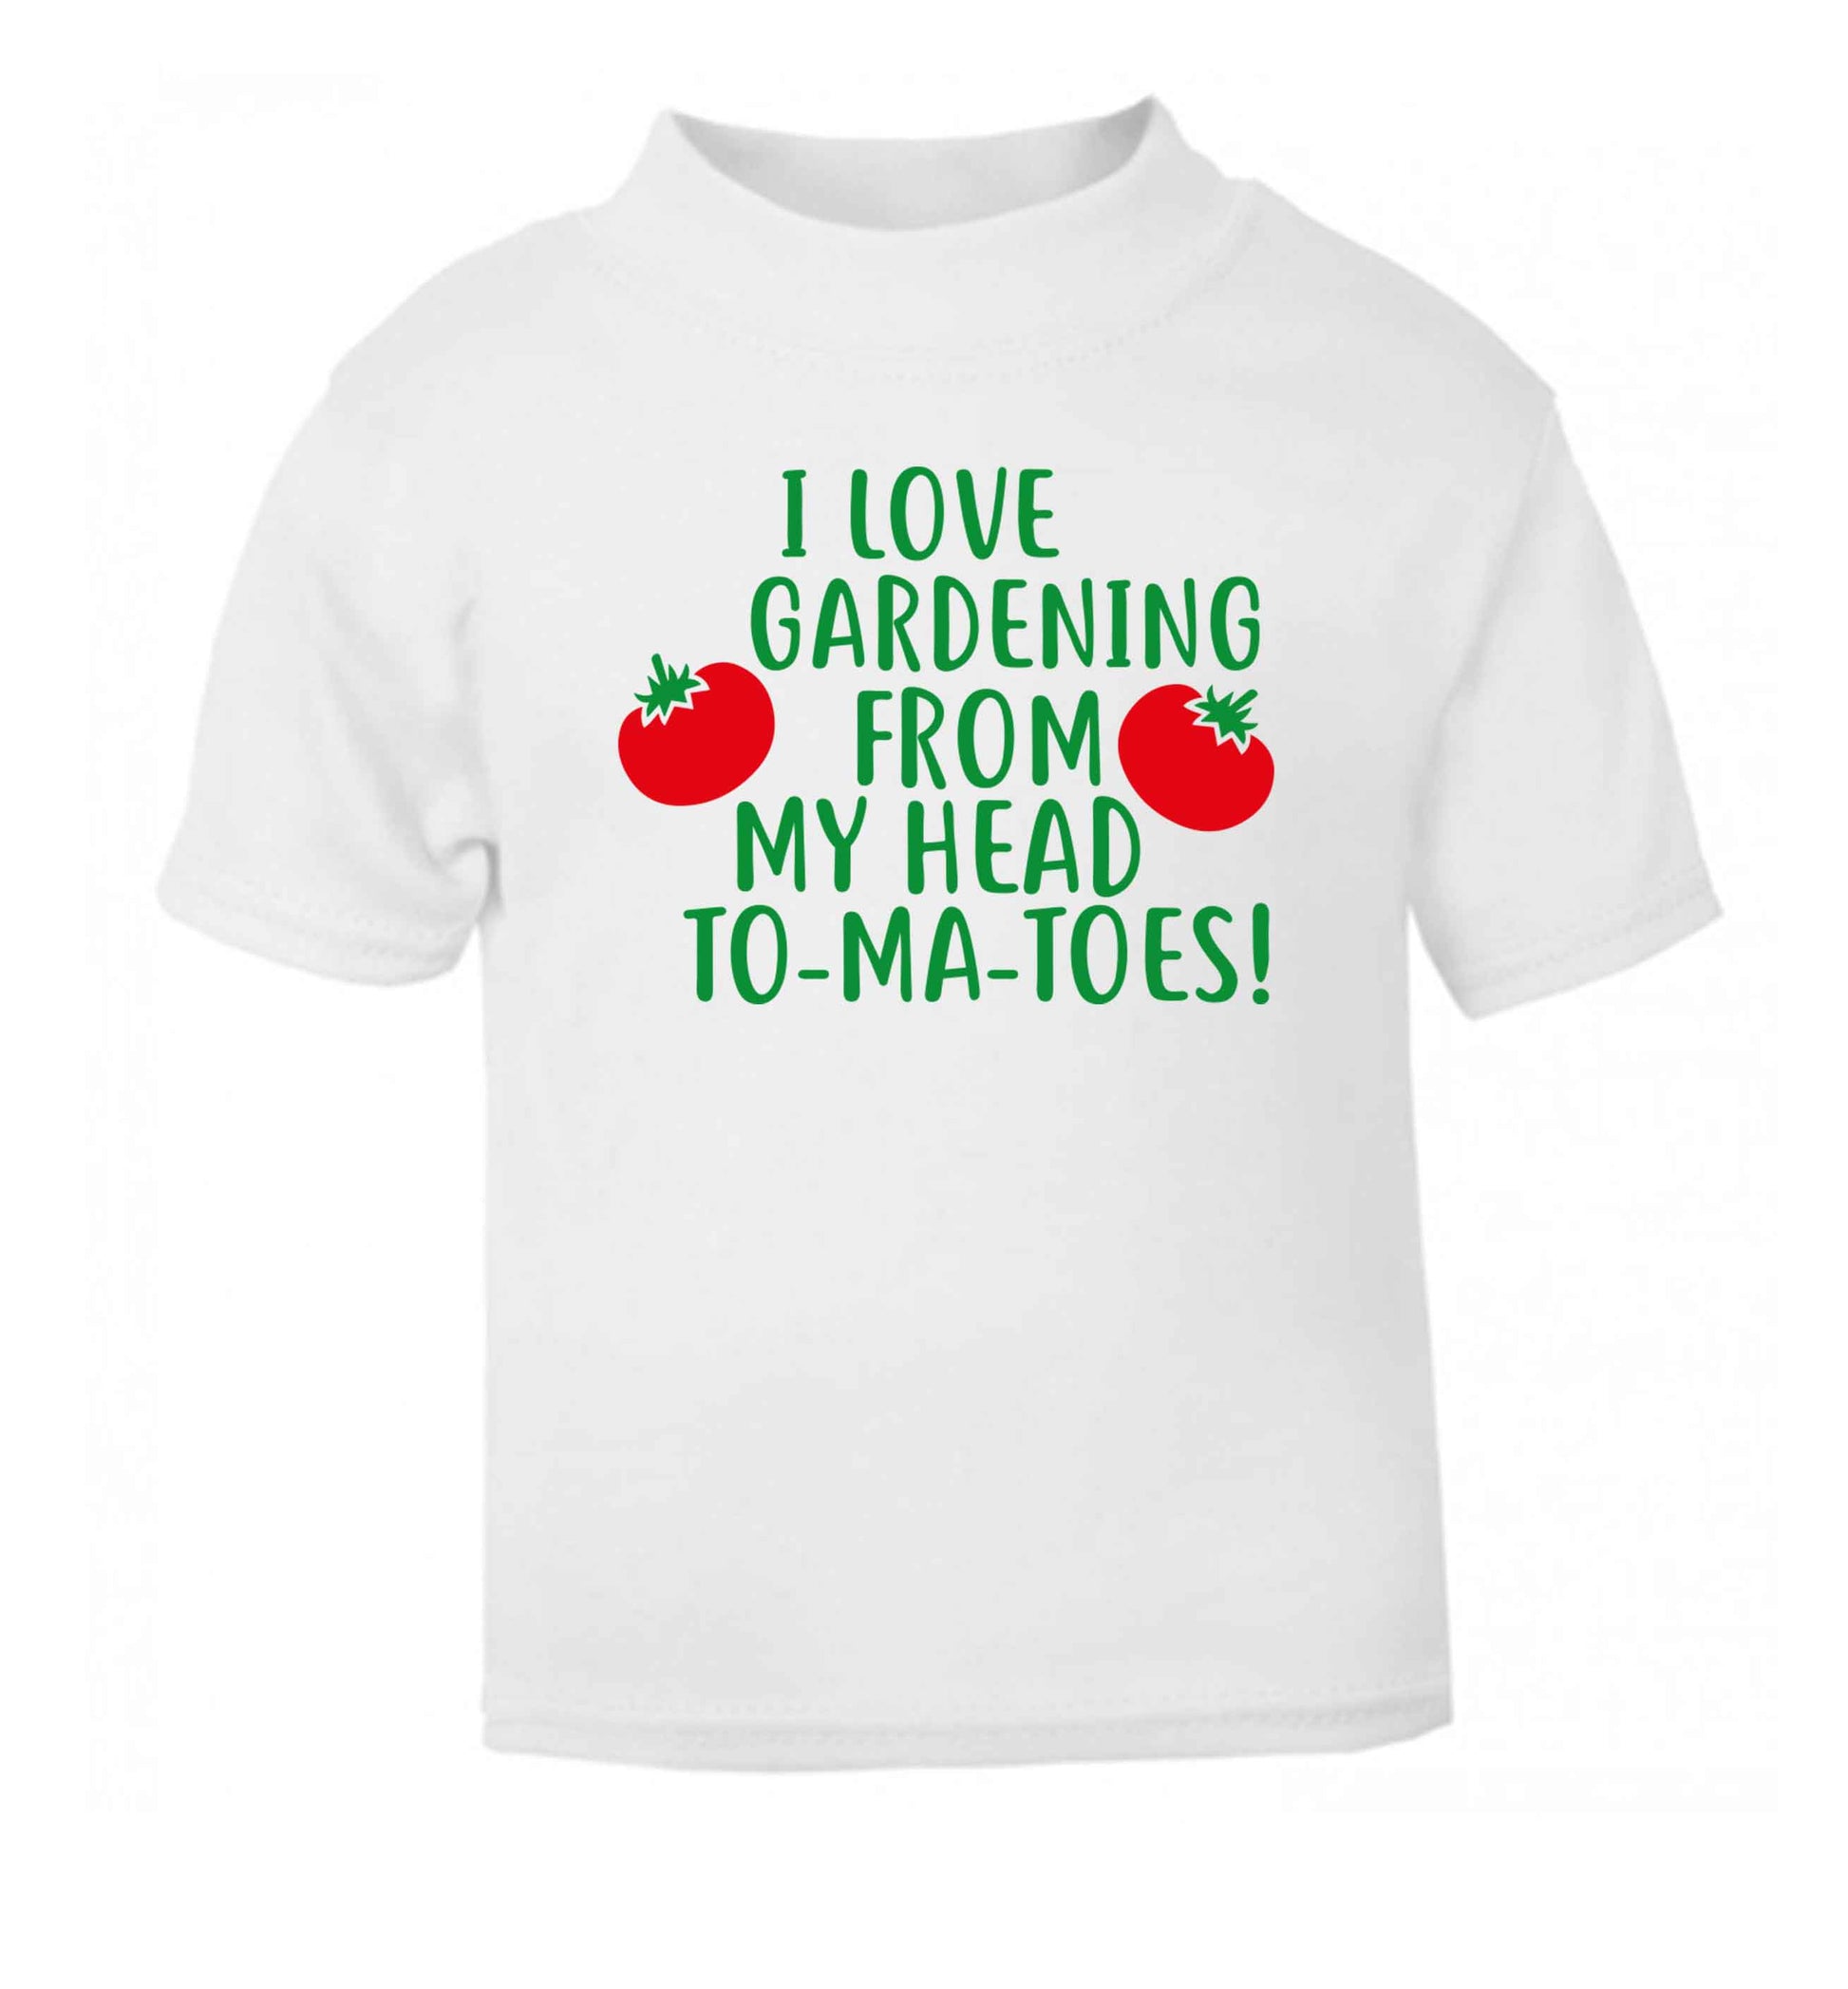 I love gardening from my head to-ma-toes white Baby Toddler Tshirt 2 Years